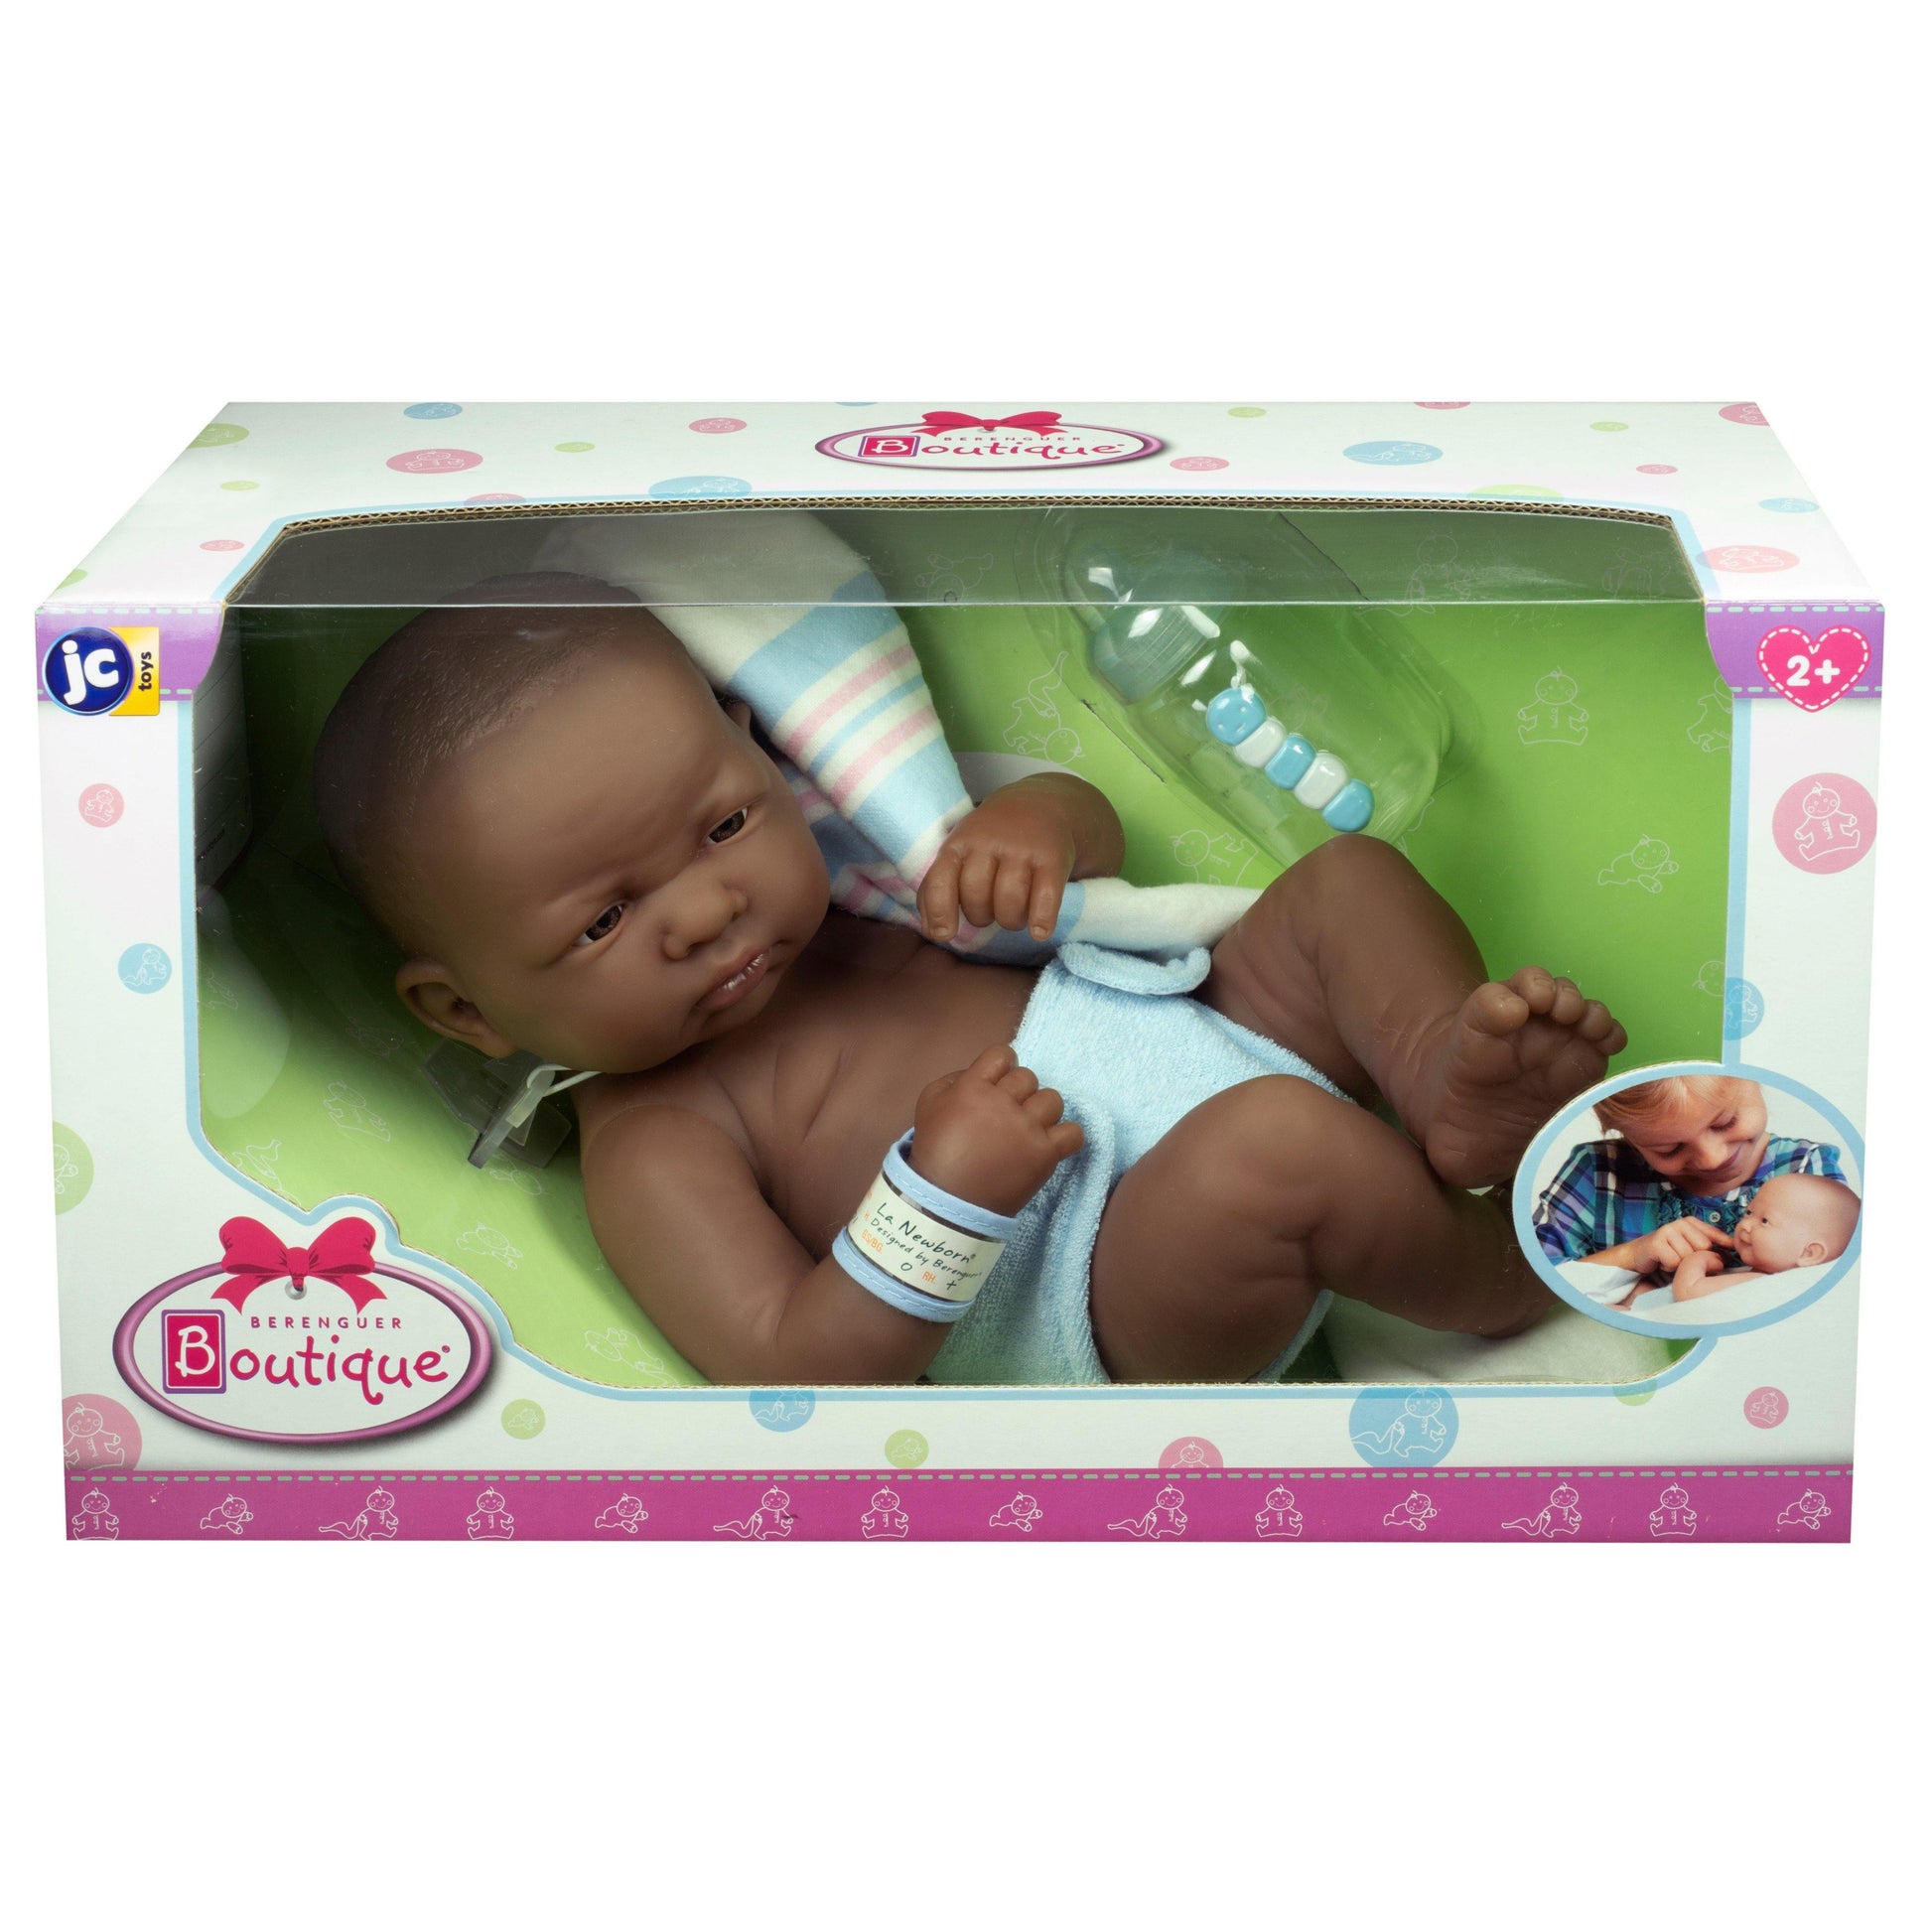 La Newborn African American "First Day" 15" Real Boy - JC Toys Group Inc.